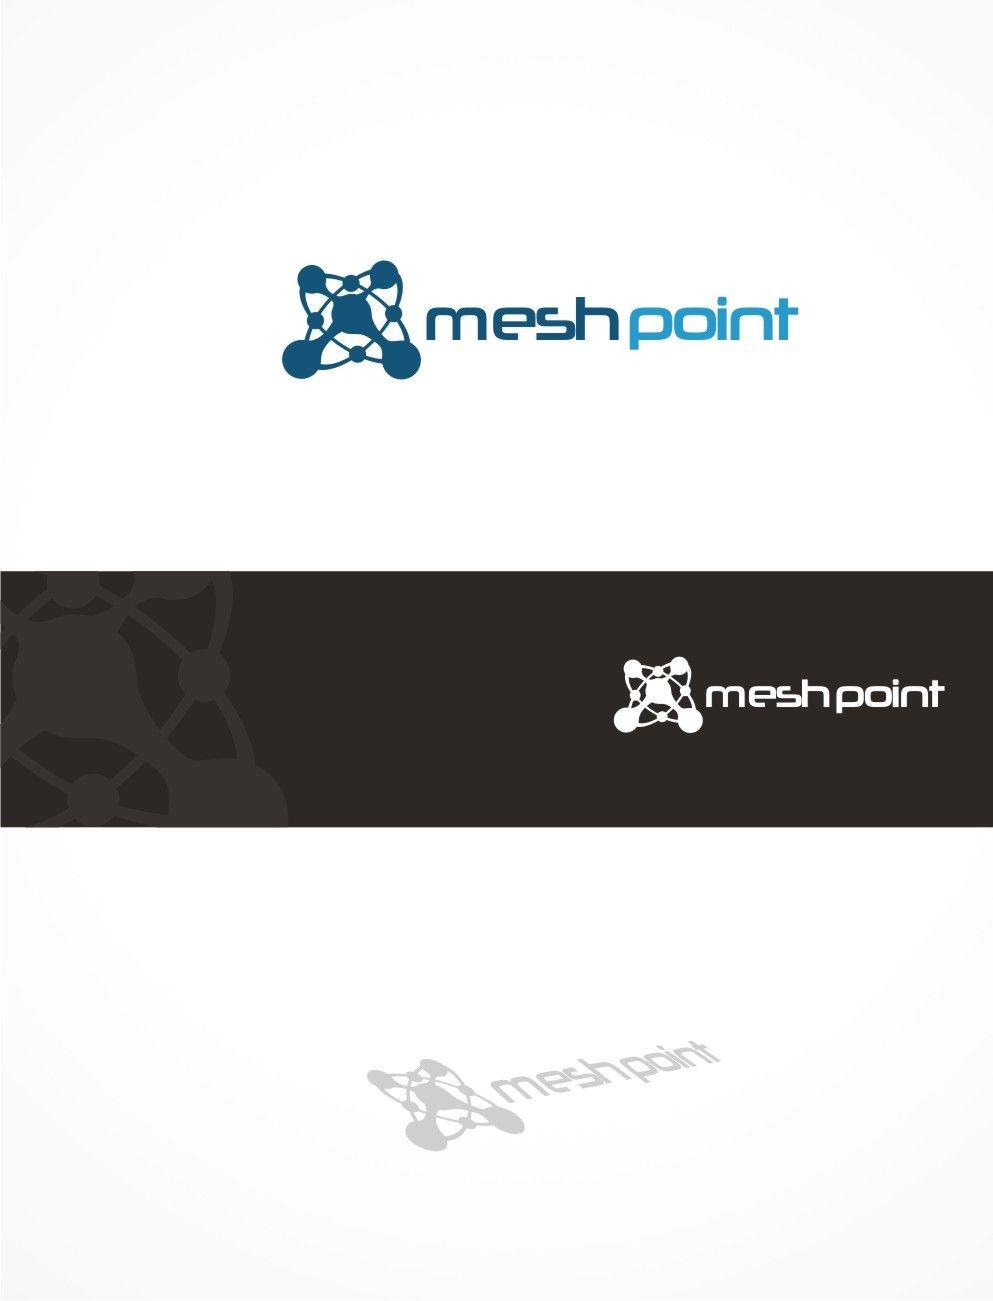 Gray Company Logo - It Company Logo Design for mesh point by gray mind | Design #2605837